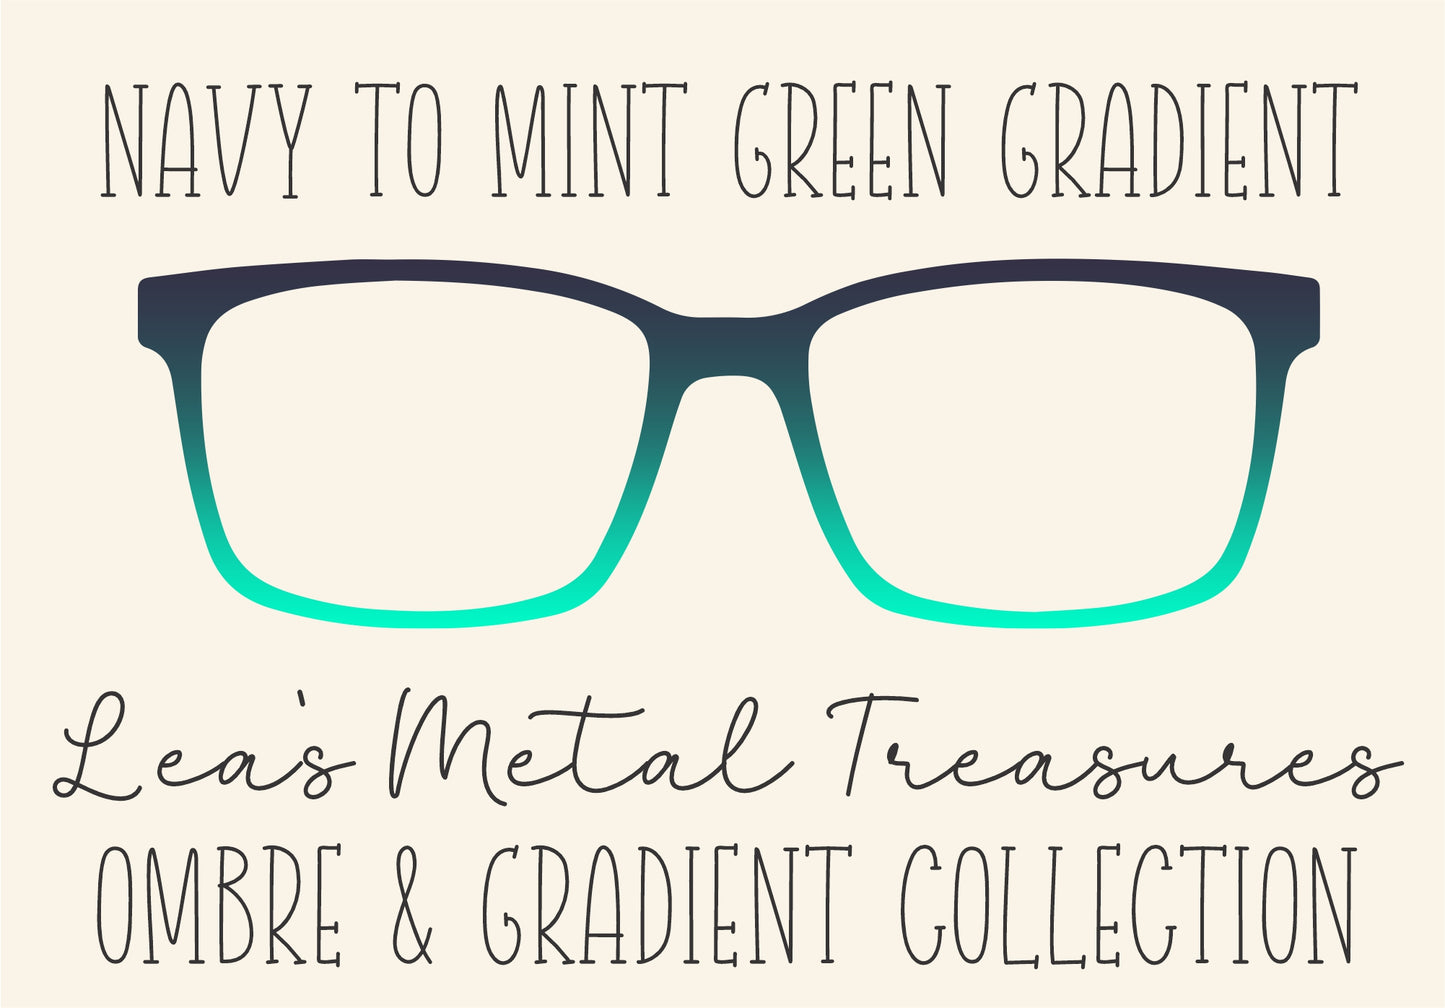 NAVY TO MINT GREEN GRADIENT Eyewear Frame Toppers COMES WITH MAGNETS